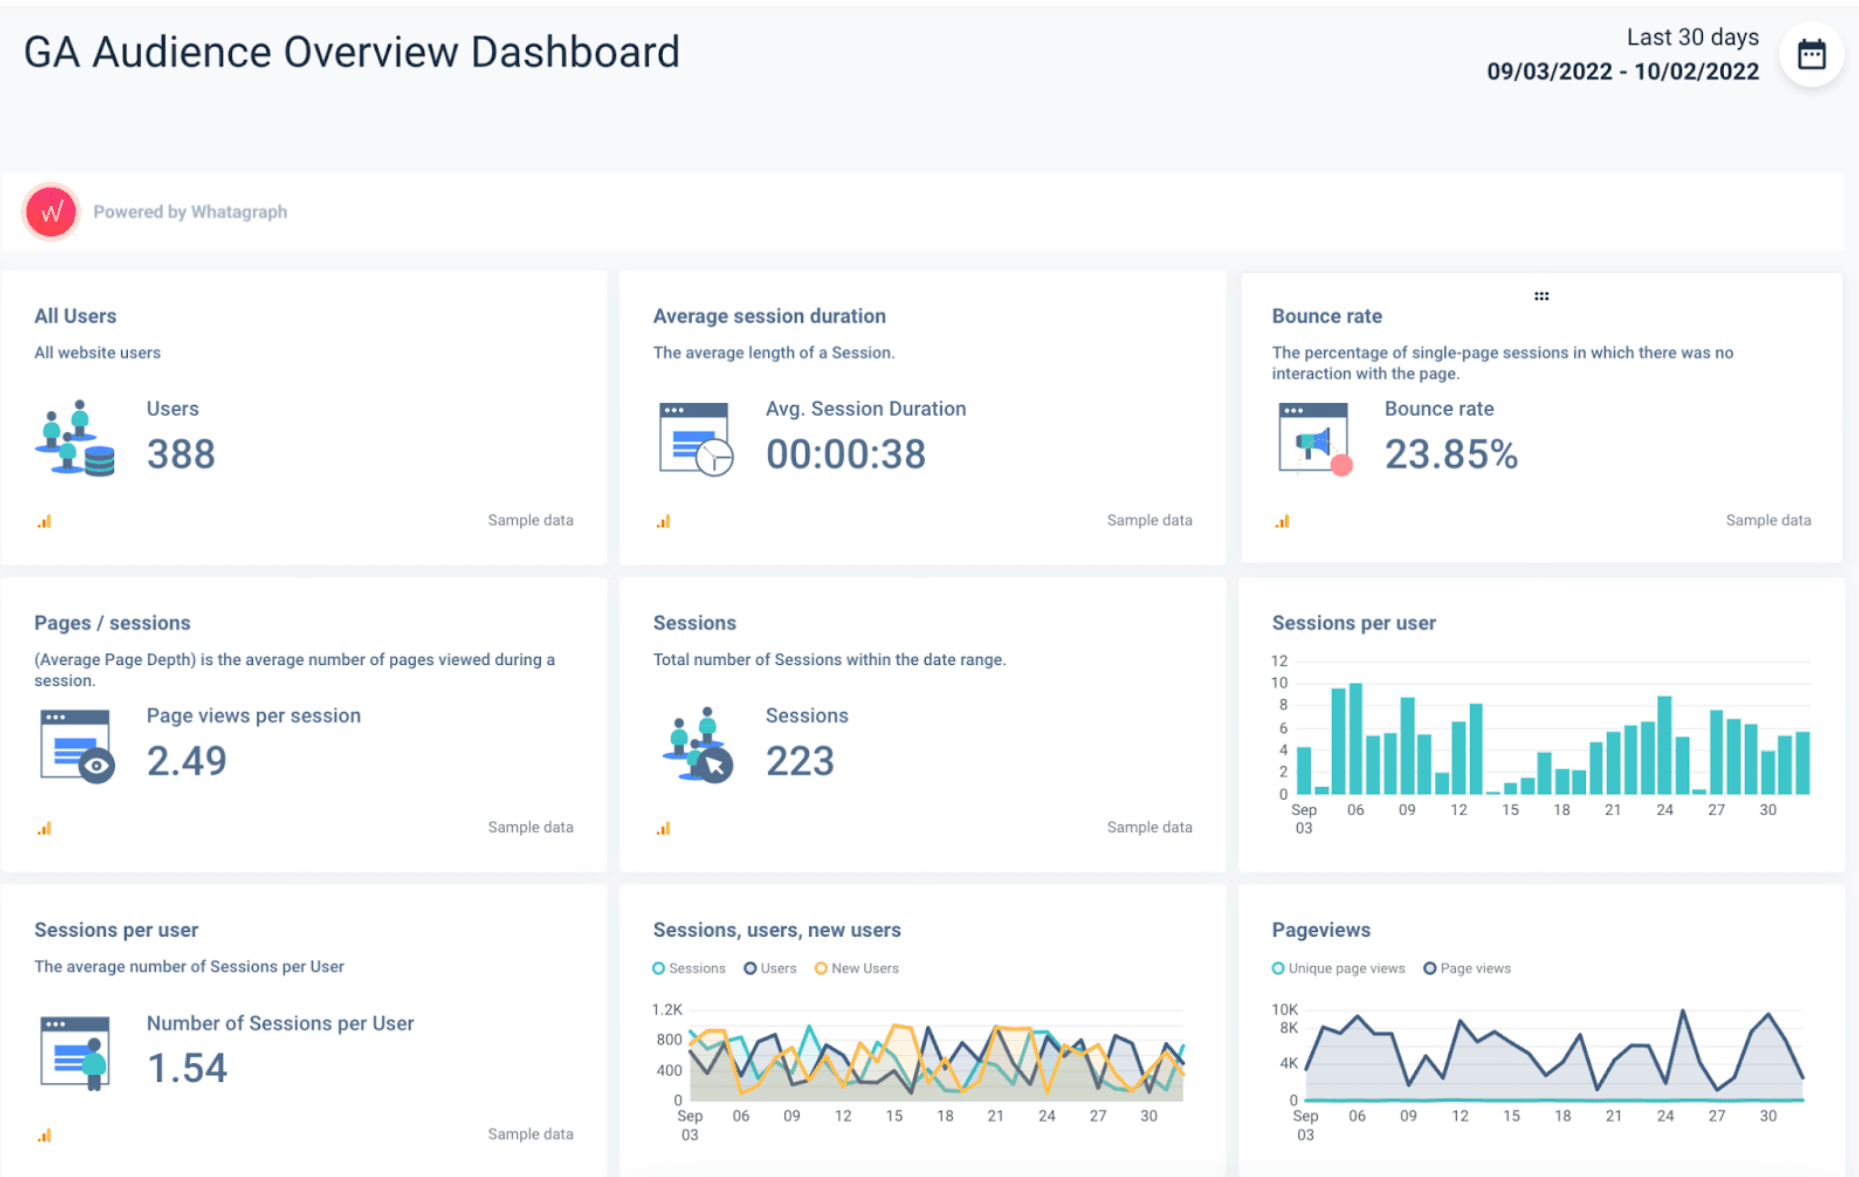 GA audience overview dashboard 